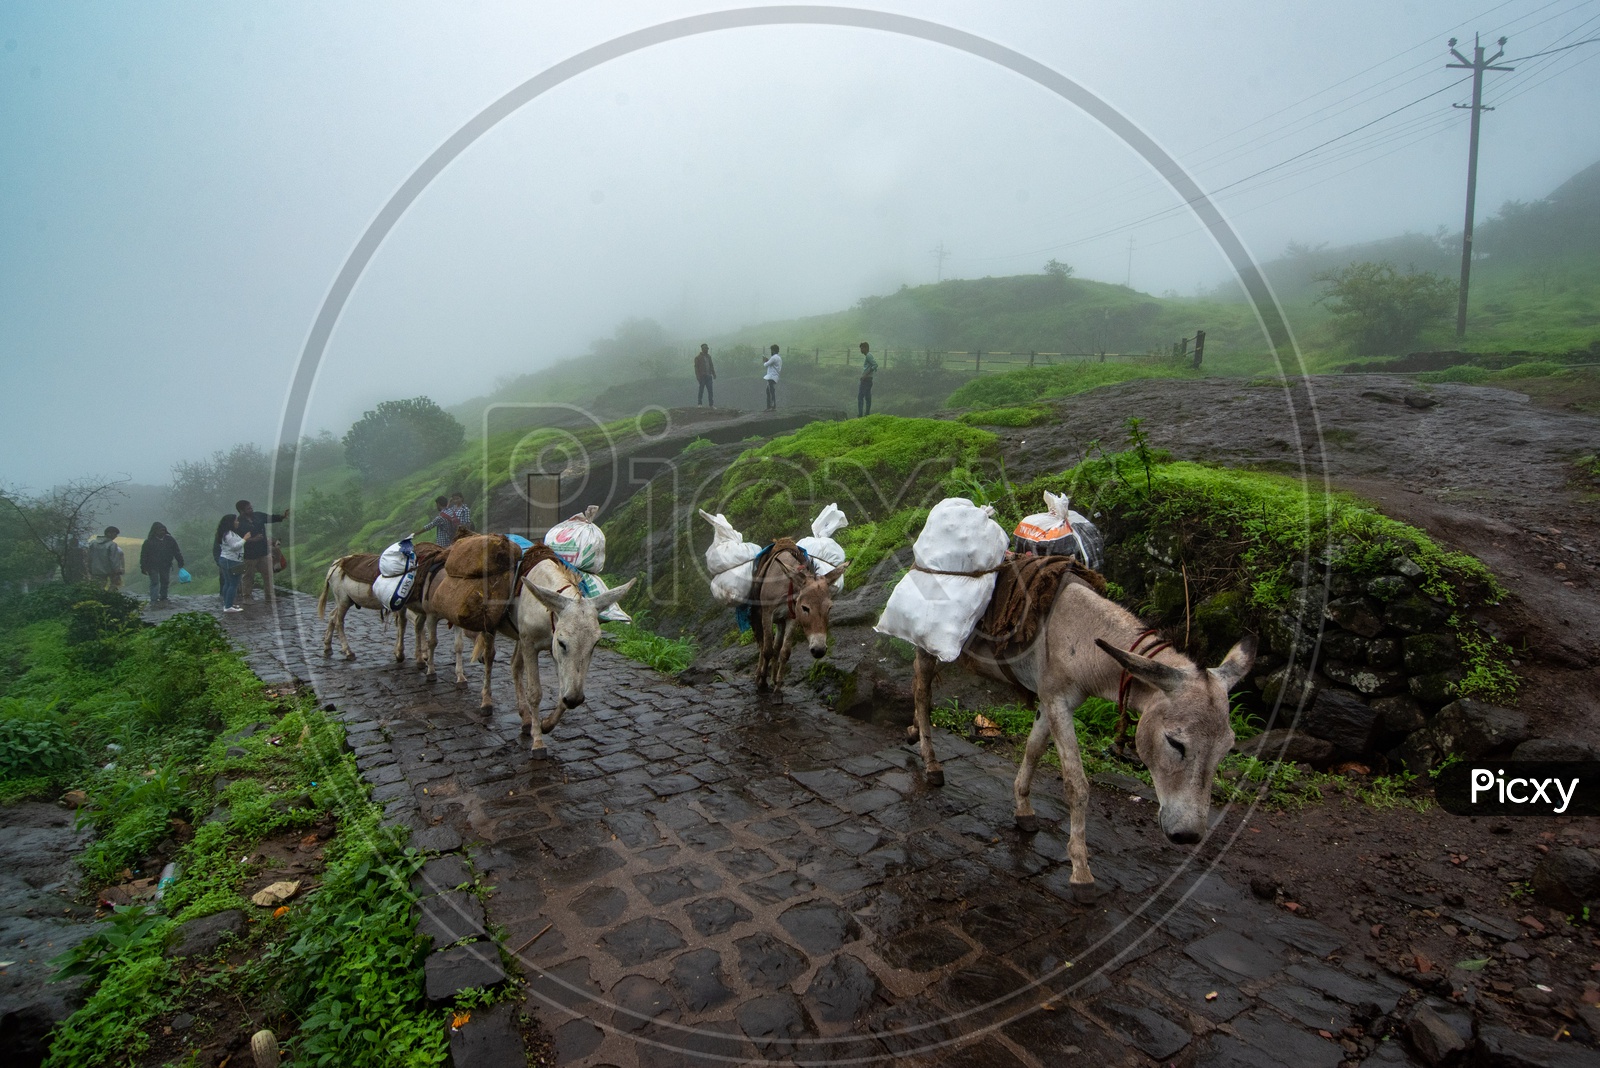 Donkeys used for transporting goods at Sinhagad Fort